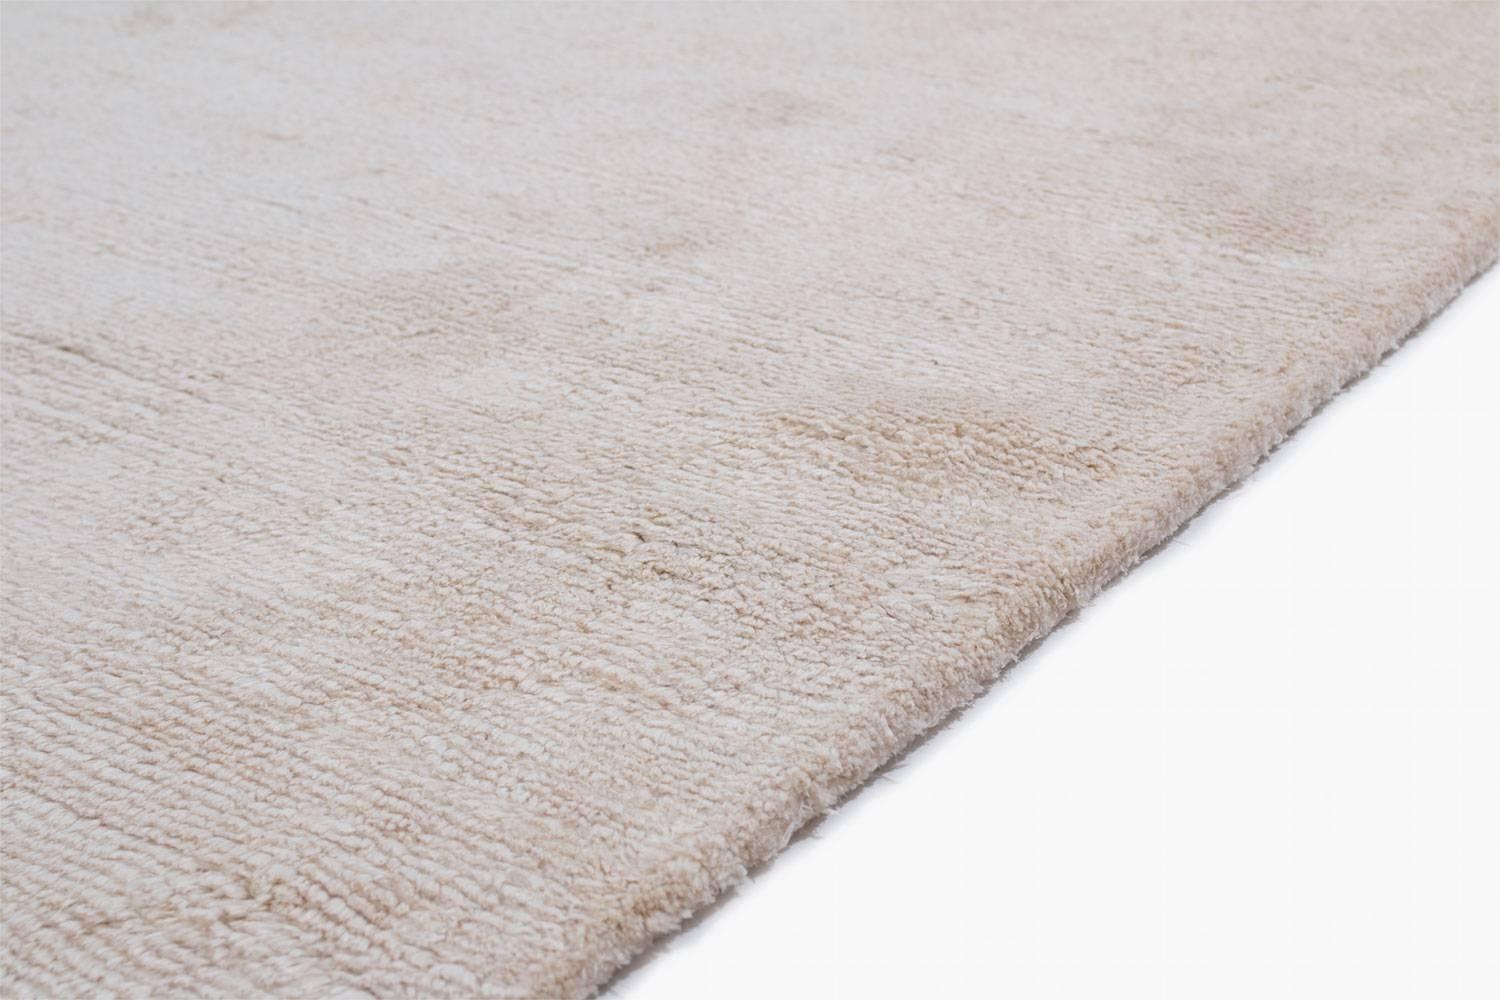 This solid white twill carpet is a gorgeous ripple of natural white Himalayan wool and silk threads. The high-quality silk texture reflects light and allows the subtlety of color to shine, 15 mm pile height creates a sumptuous pillow for each step -